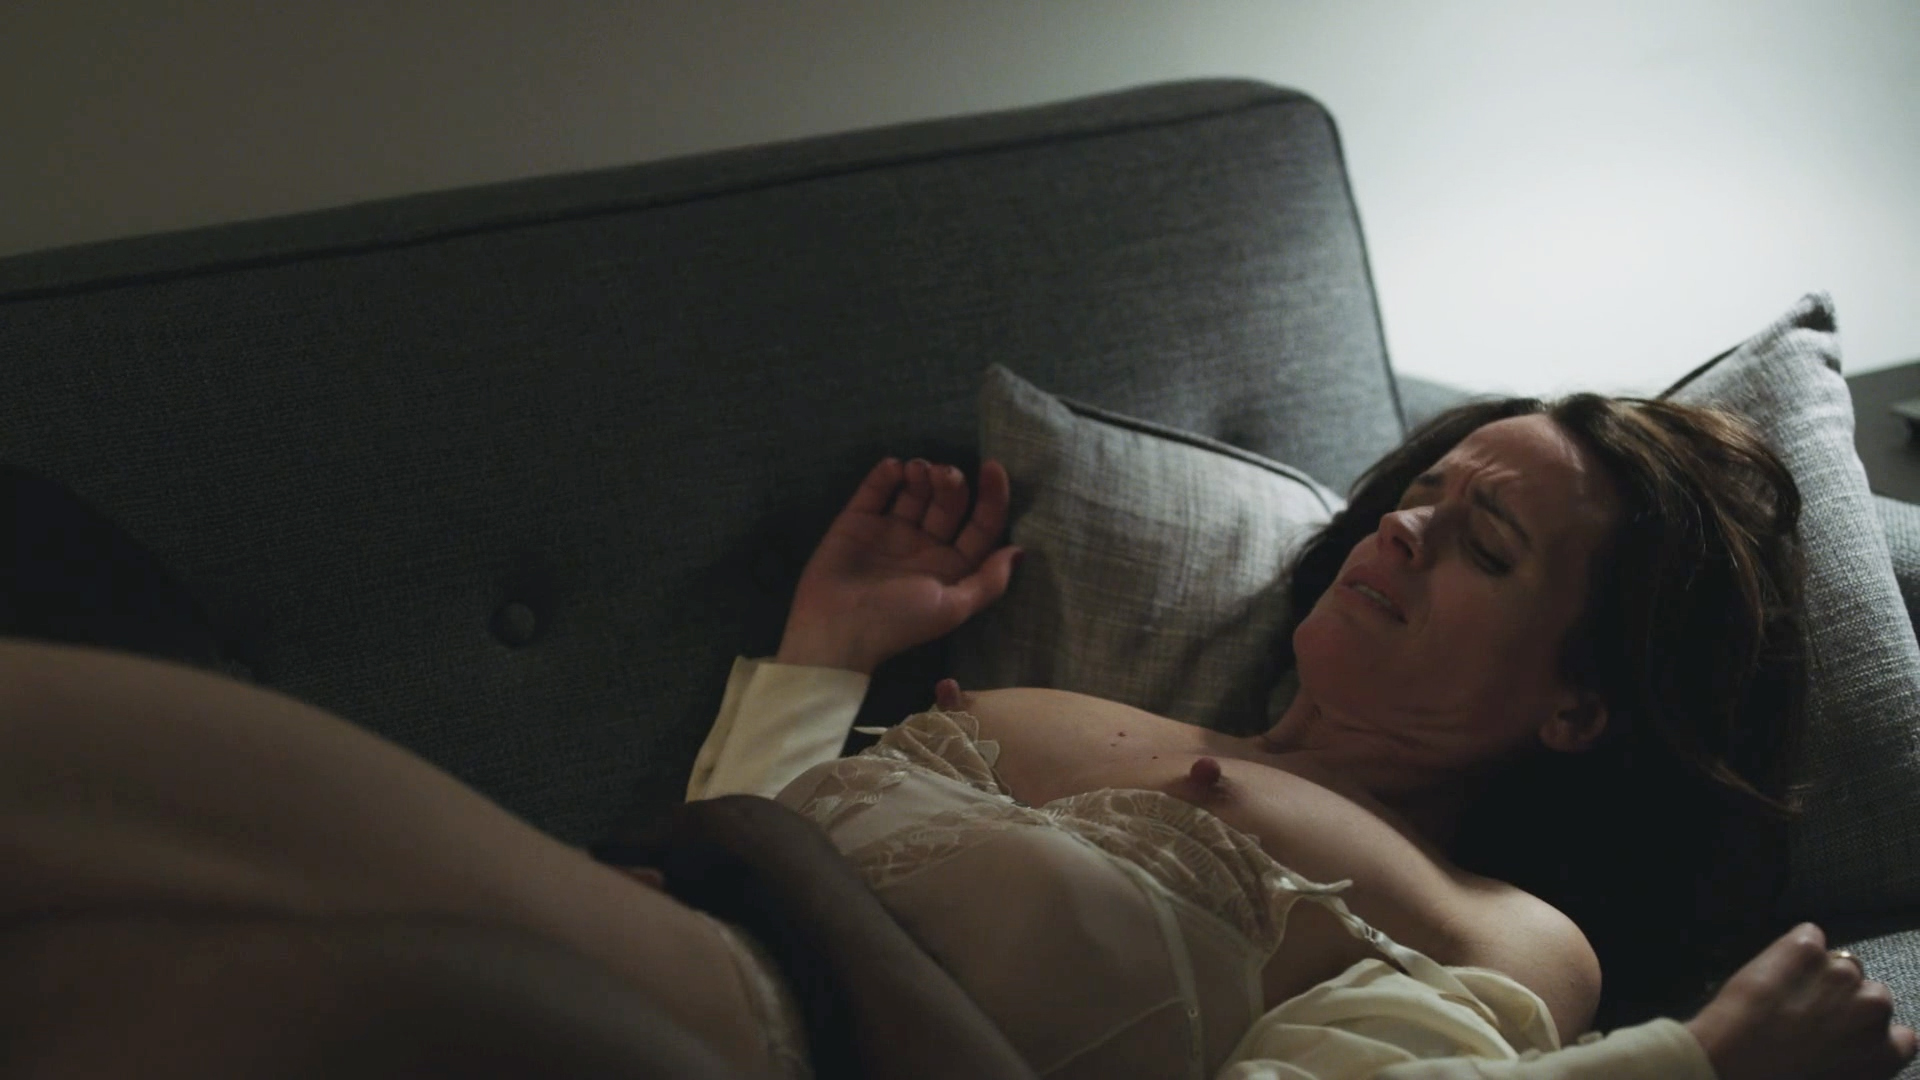 Elizabeth Reaser & Other Nude And Wild Sex Scenes in Easy ().